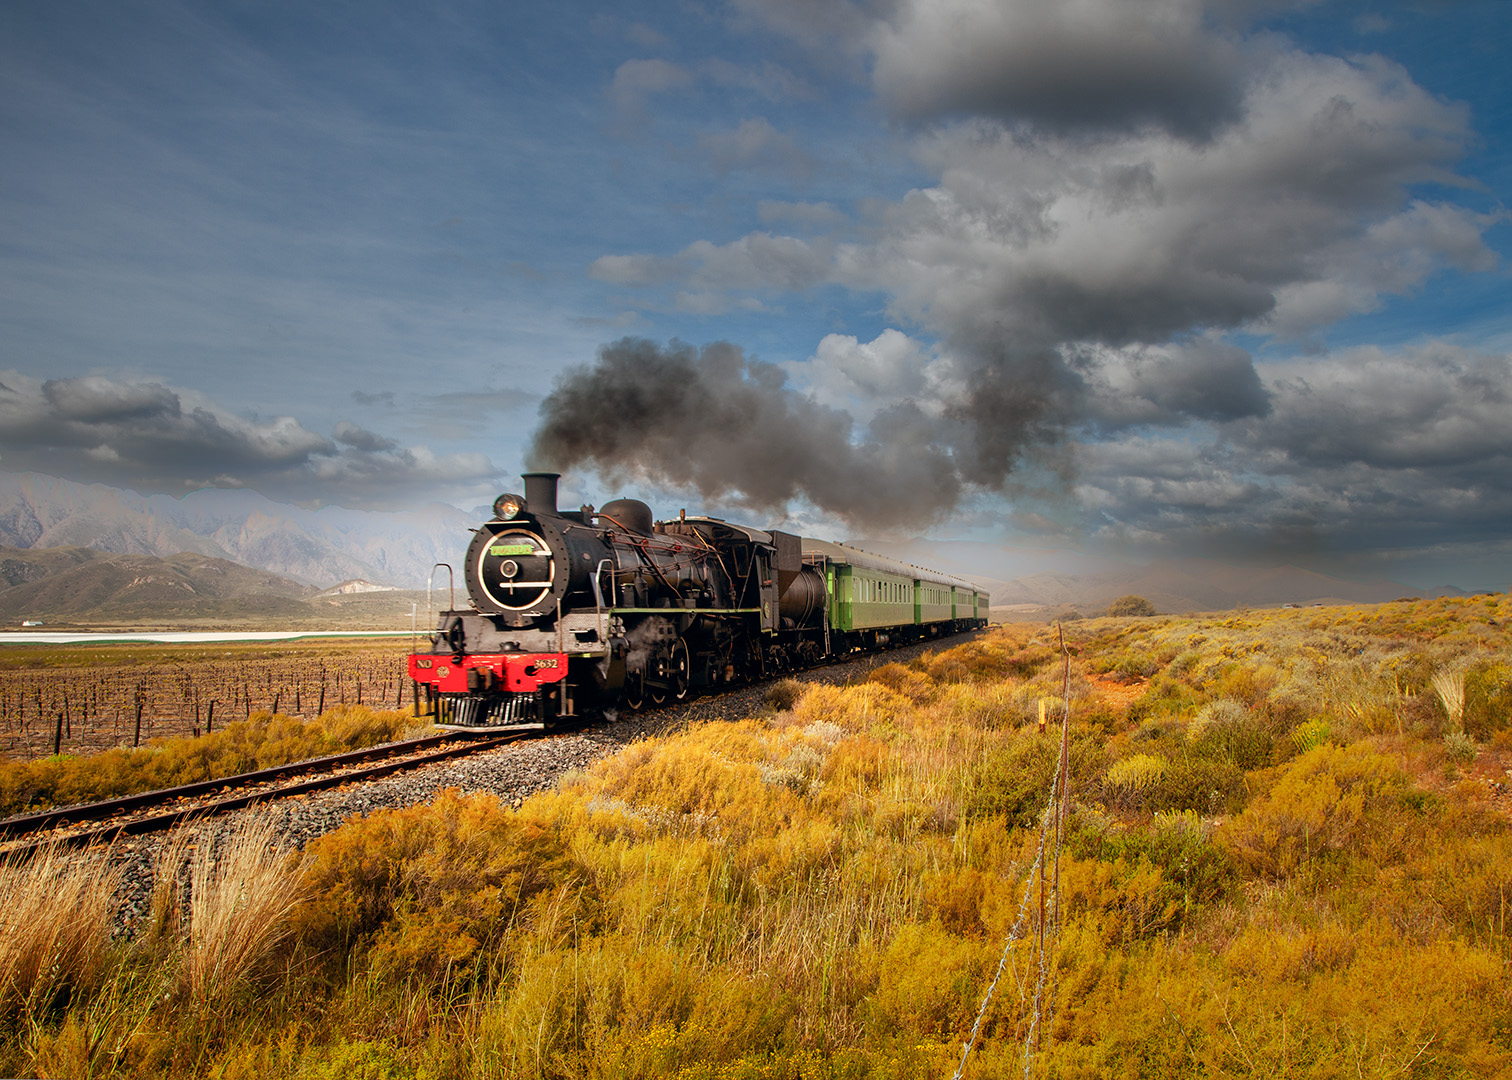 Robertson Steam Train Wine Tour in the Cape Winelands, South Africa